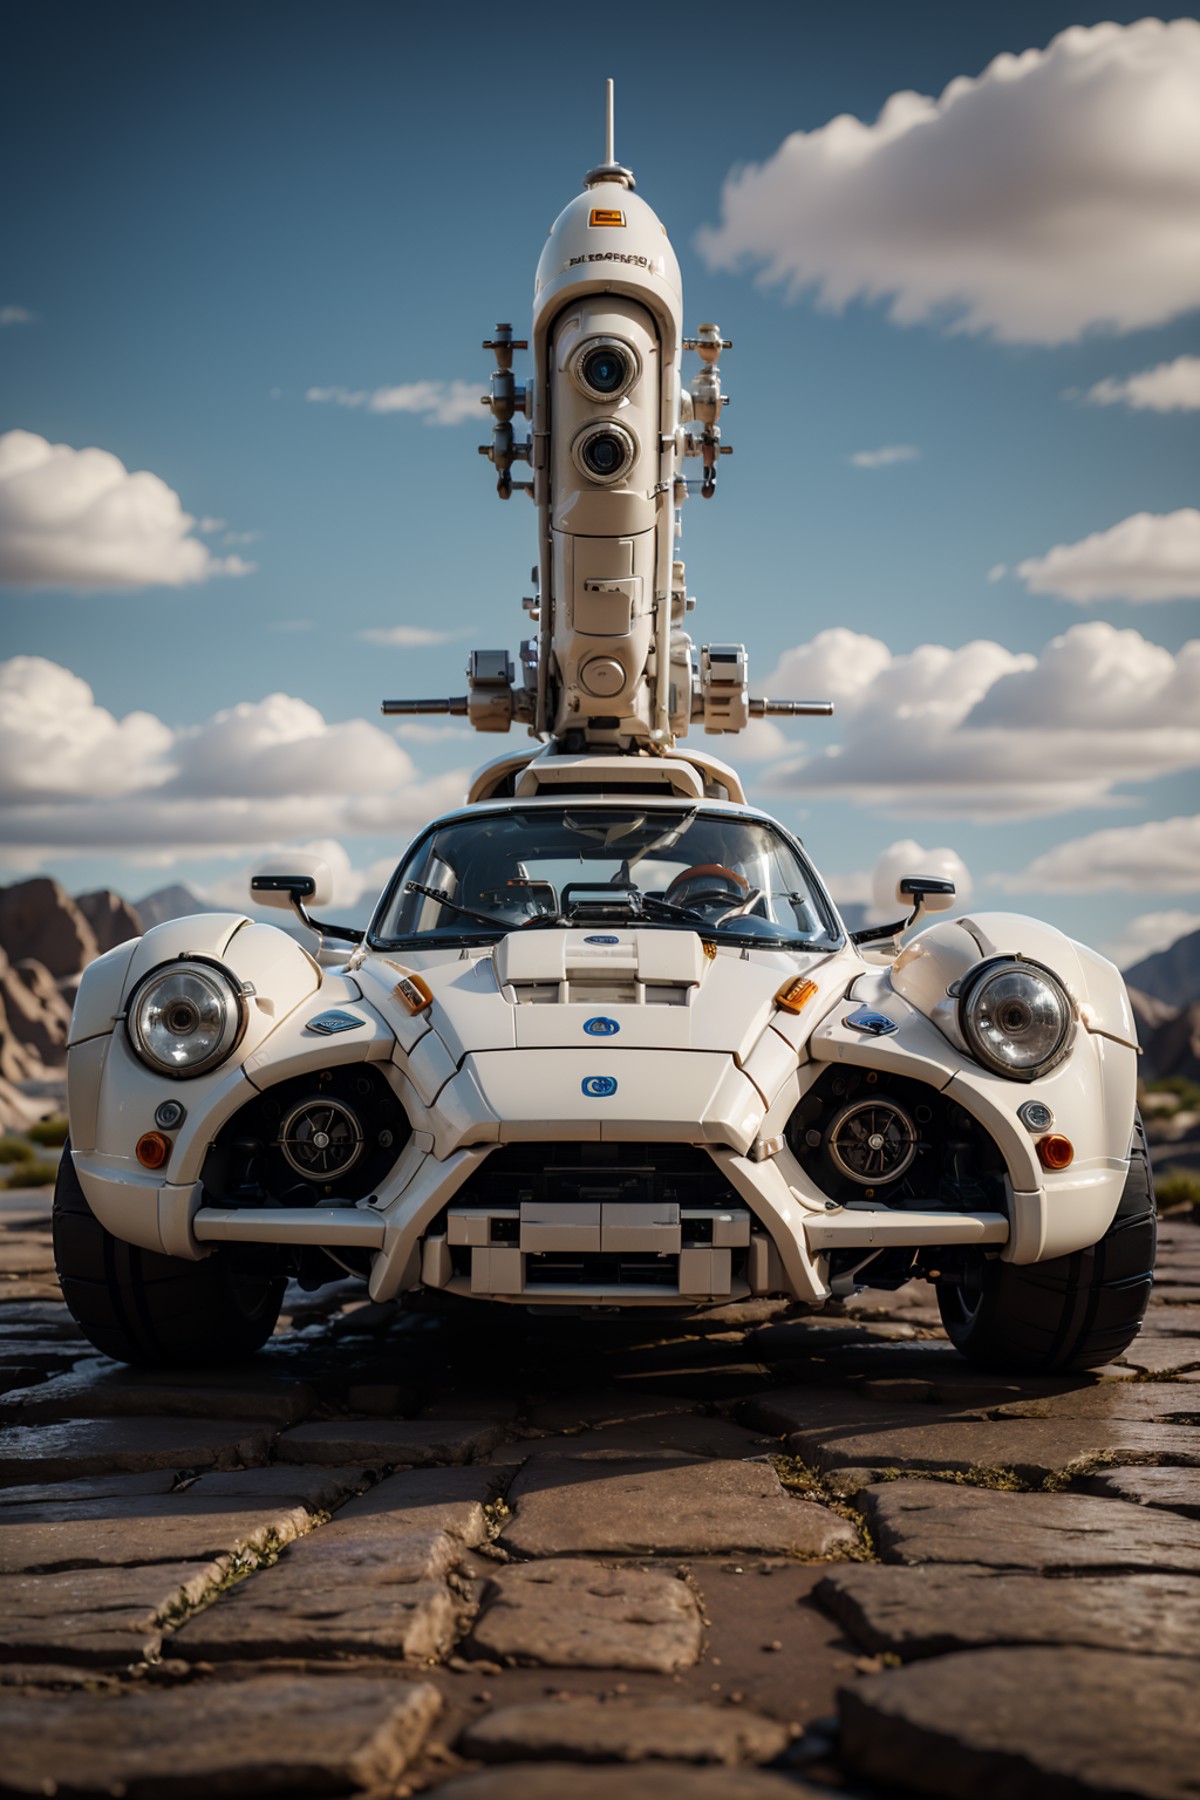 BJ_Lego bricks, no_humans, ground_vehicle, motor_vehicle, science_fiction, vehicle_focus,
cinematic lighting,strong contra...